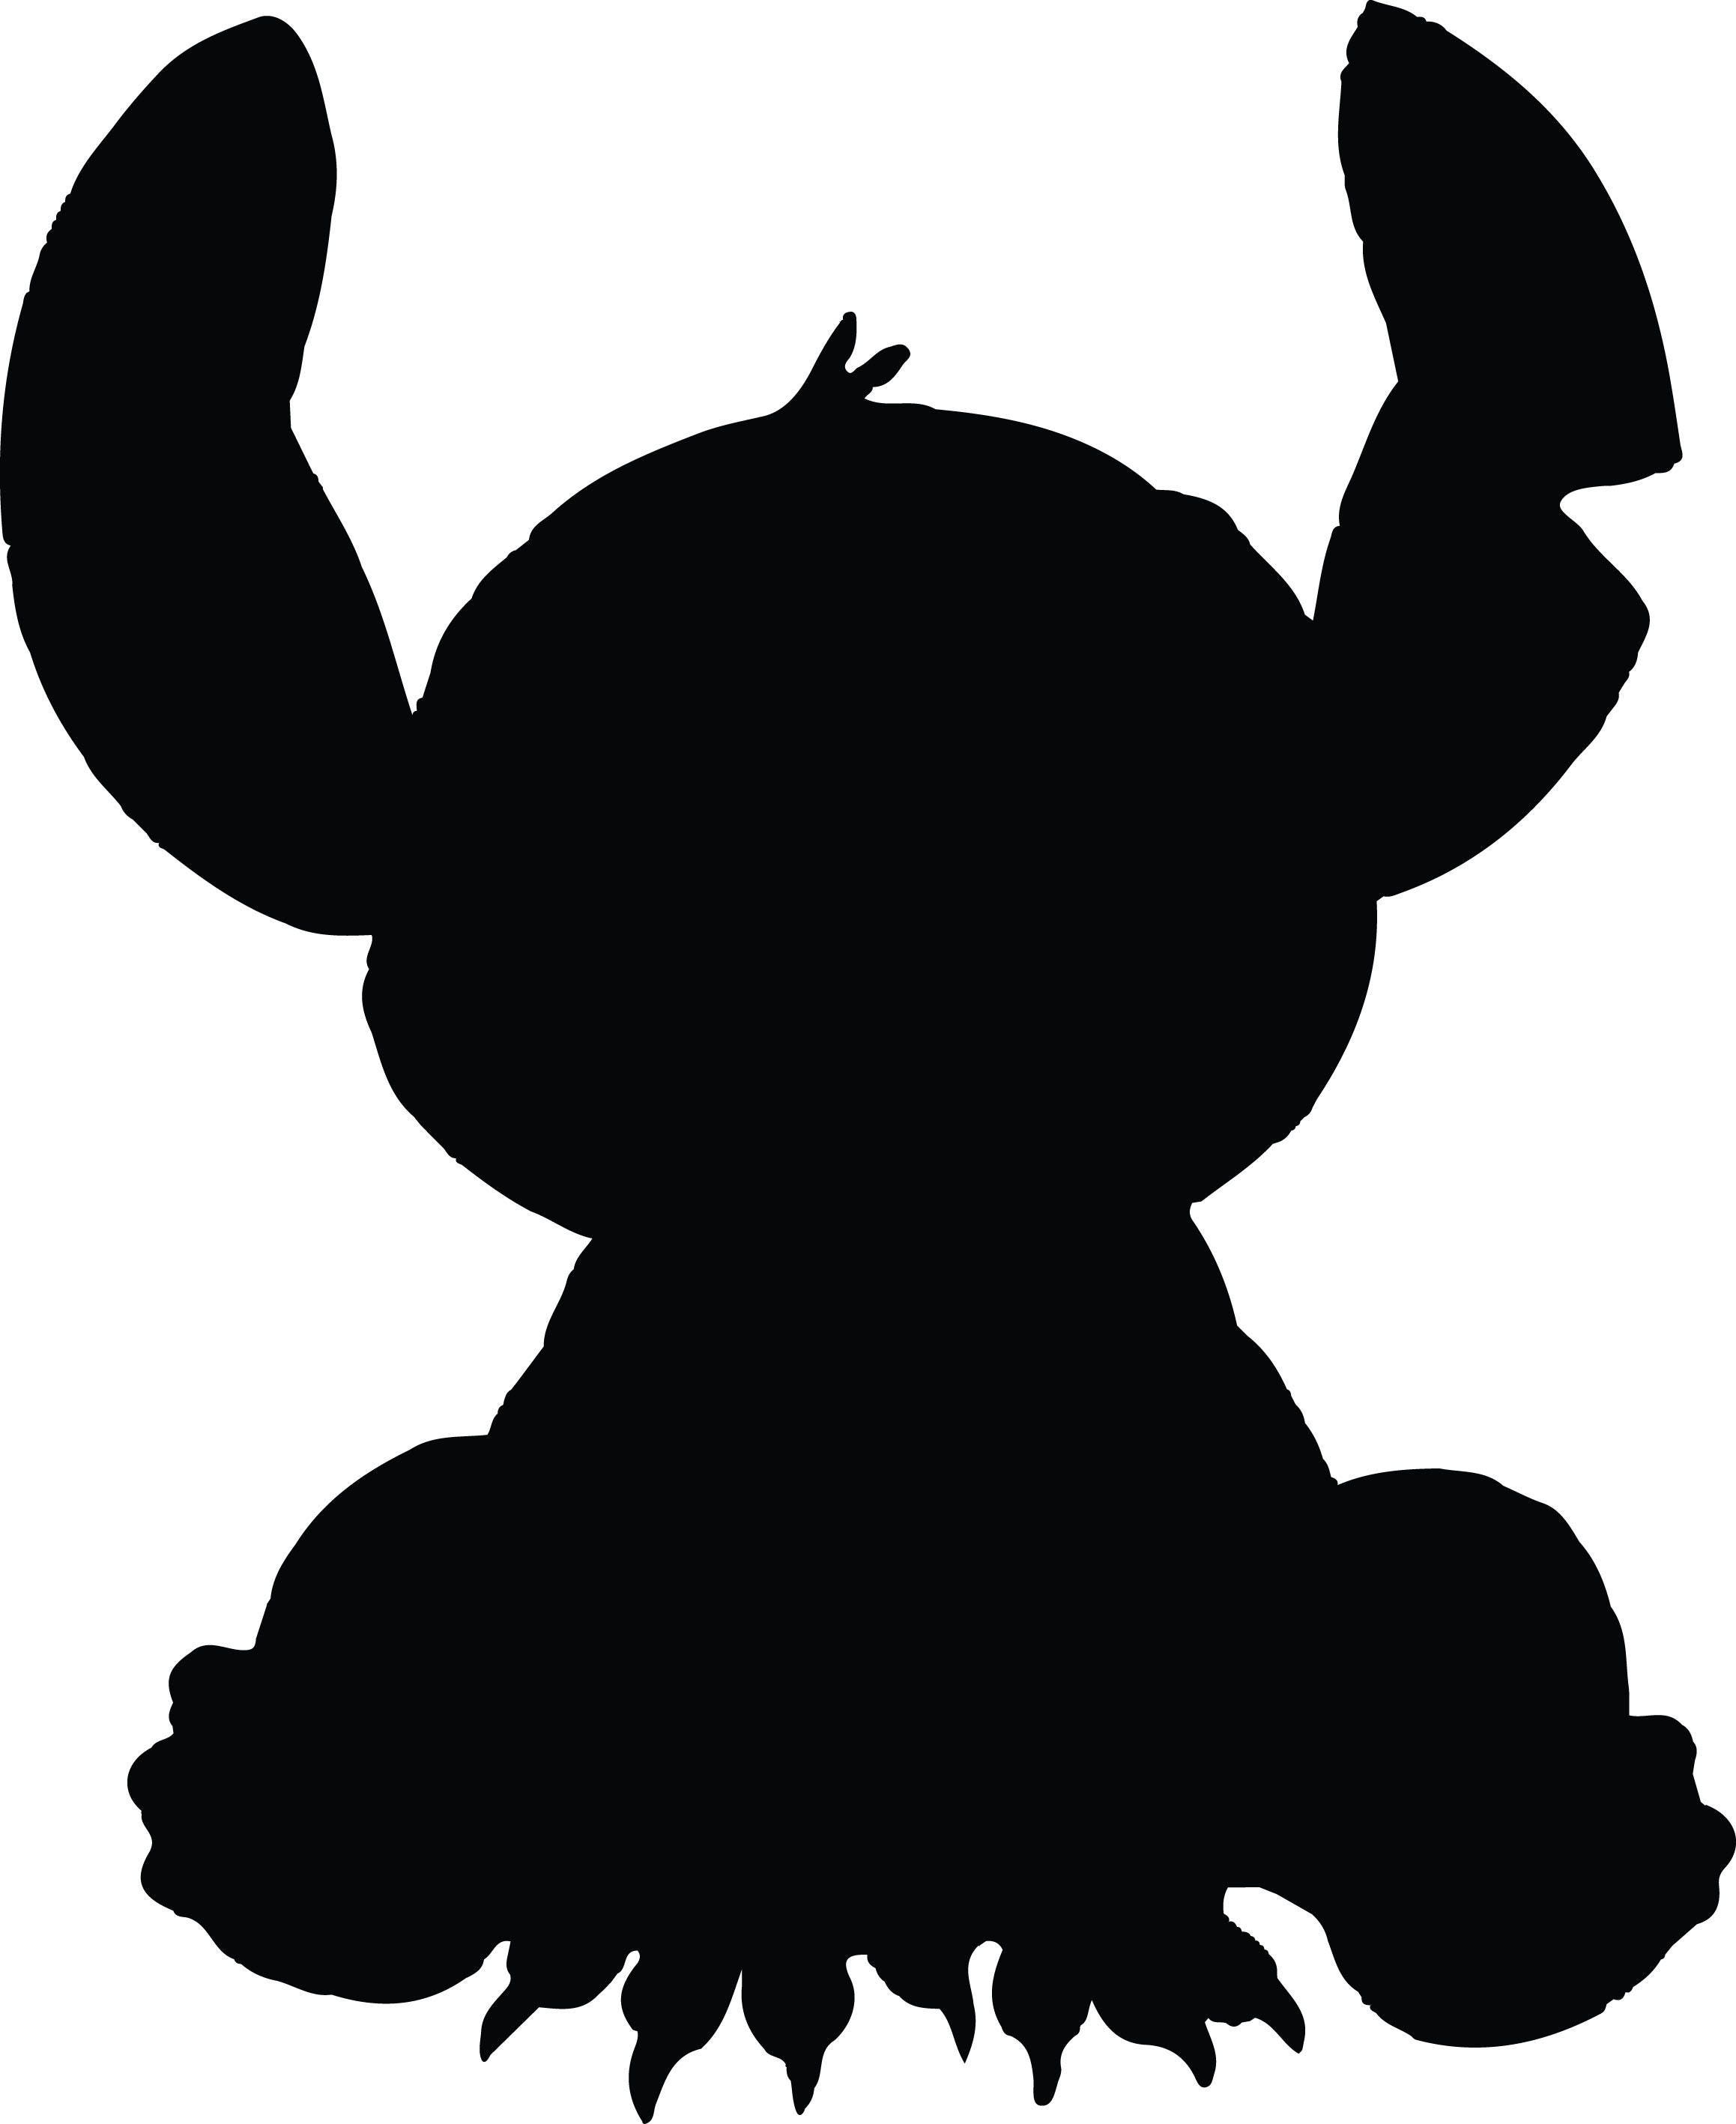 Lilo And Stitch Silhouette | www.pixshark.com - Images Galleries With A